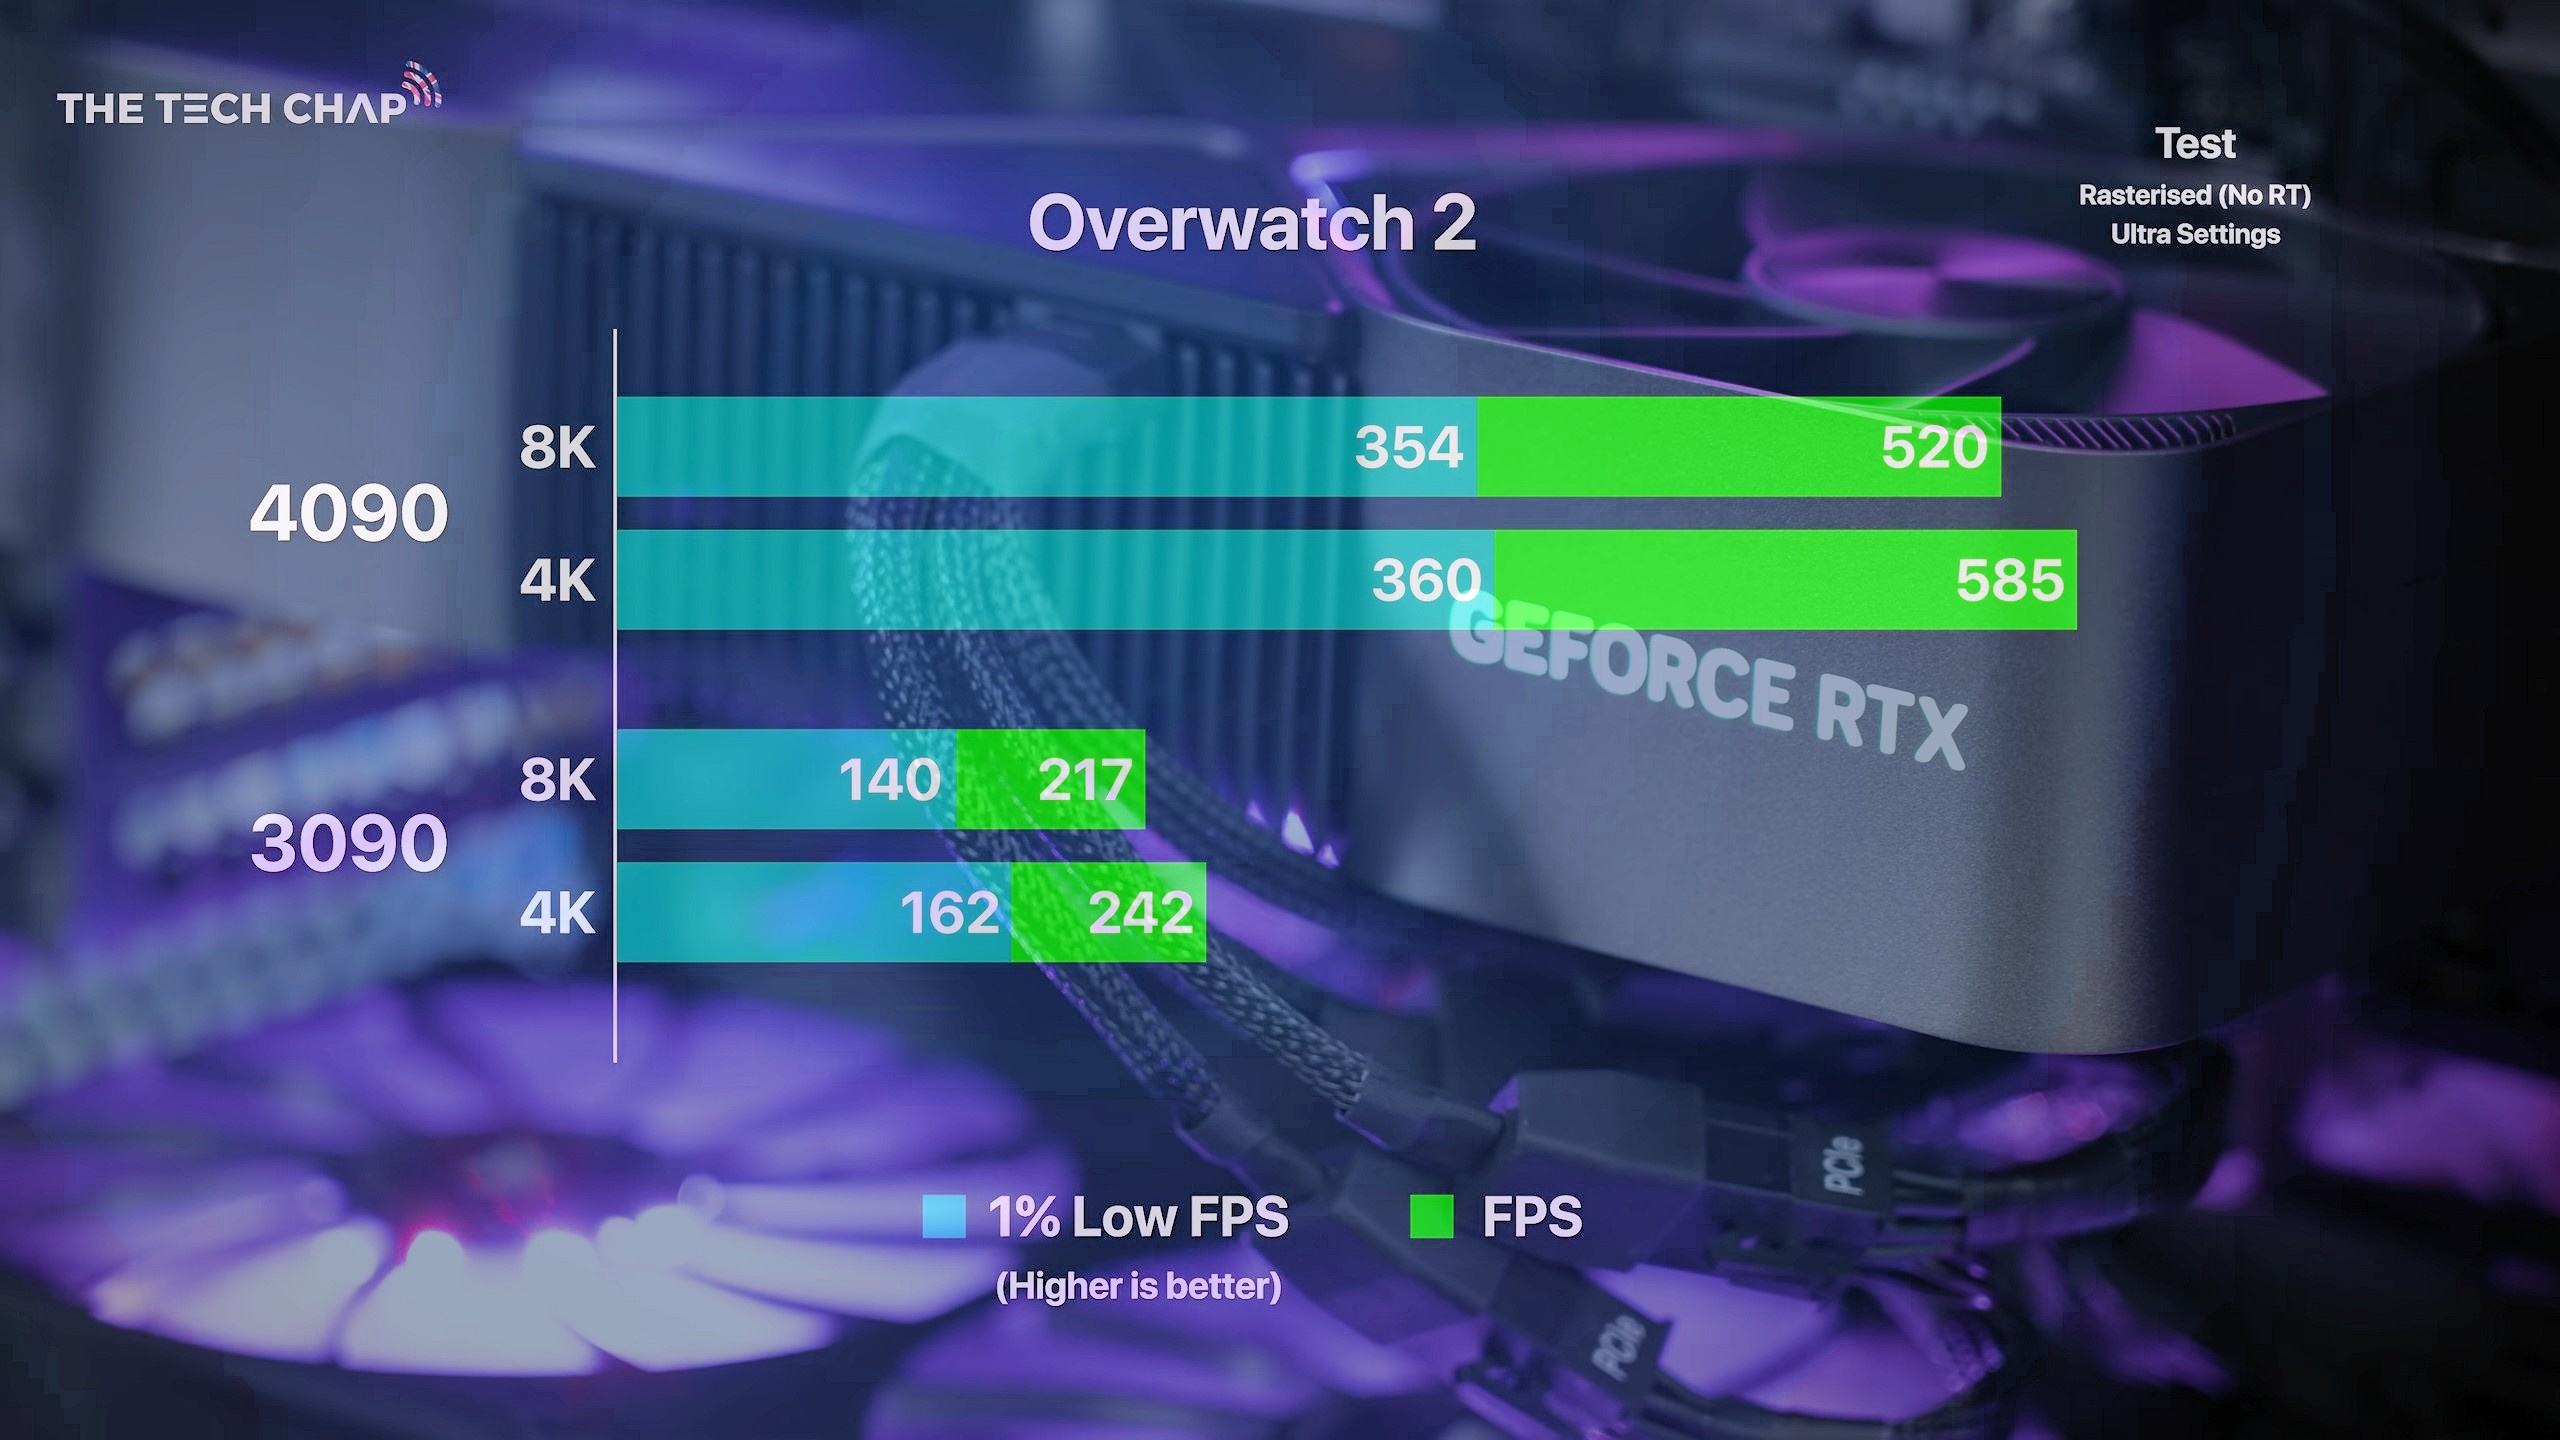 GeForce RTX 4090 has been tested at 8K, up to 520 FPS in Overwatch 2